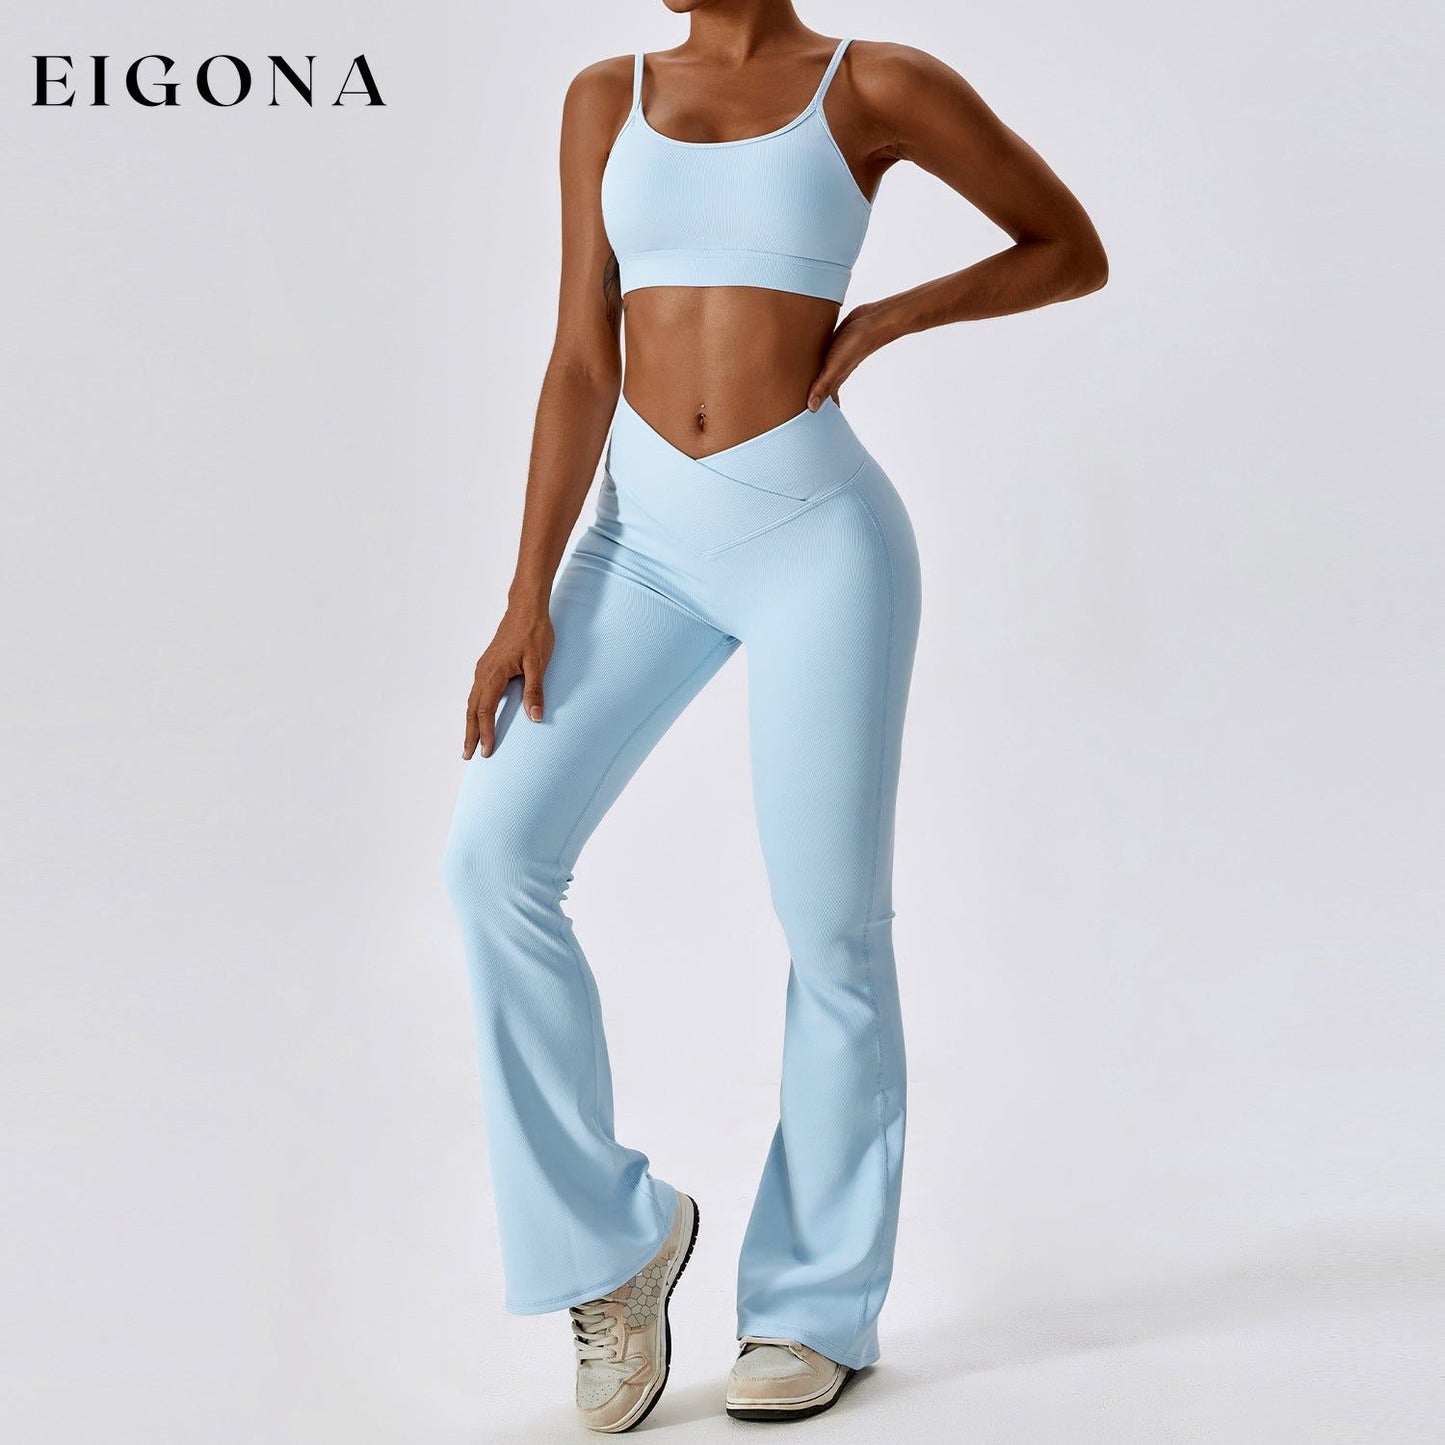 Thread Abdominal Shaping High Waist Beauty Back Yoga Suit Quick Drying Push up Hip Raise Skinny Workout Exercise Outfit -1 Bra Bell-Bottom Pants Sky Blue 2 piece activewear clothes set workout